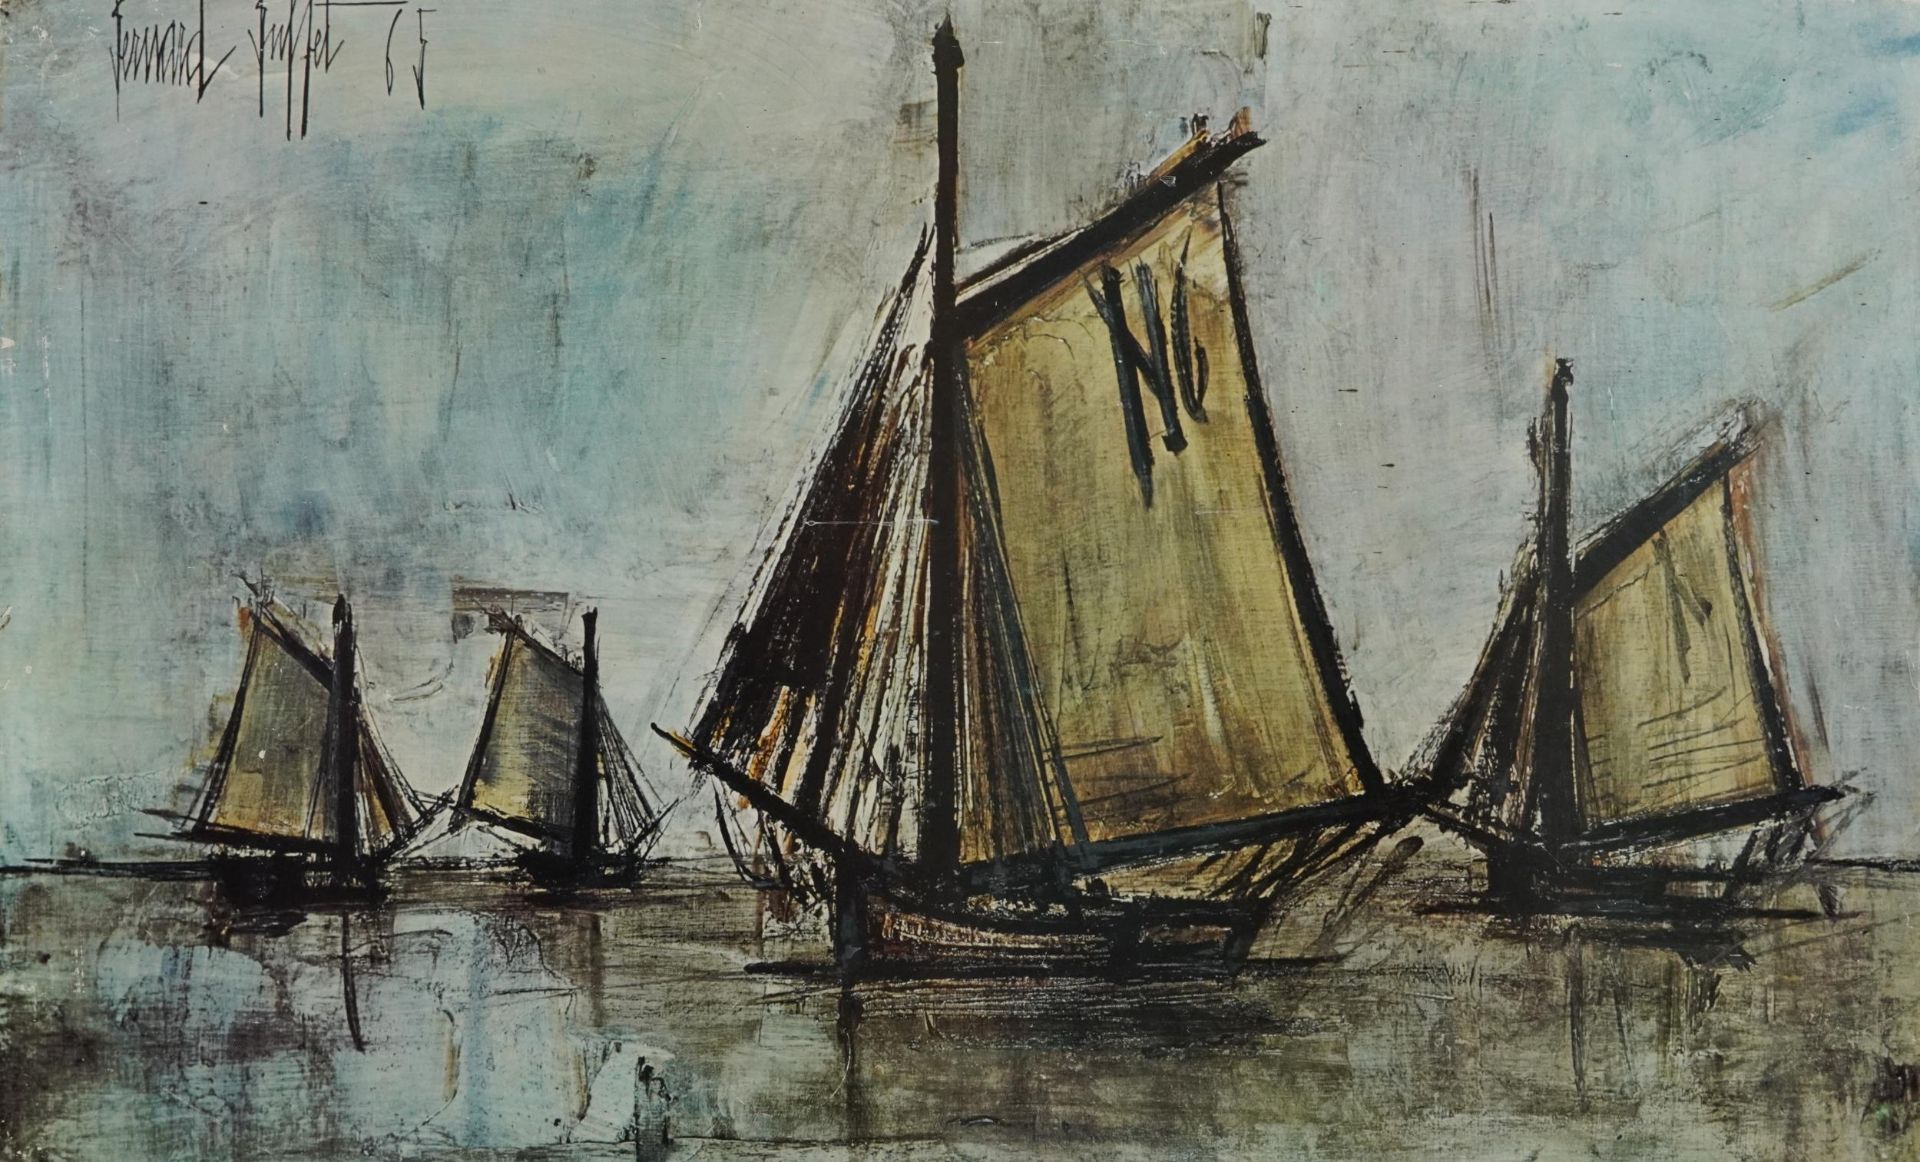 After Bernard Buffet - Boats on water, vintage print in colour, framed, 85cm x 53cm excluding the